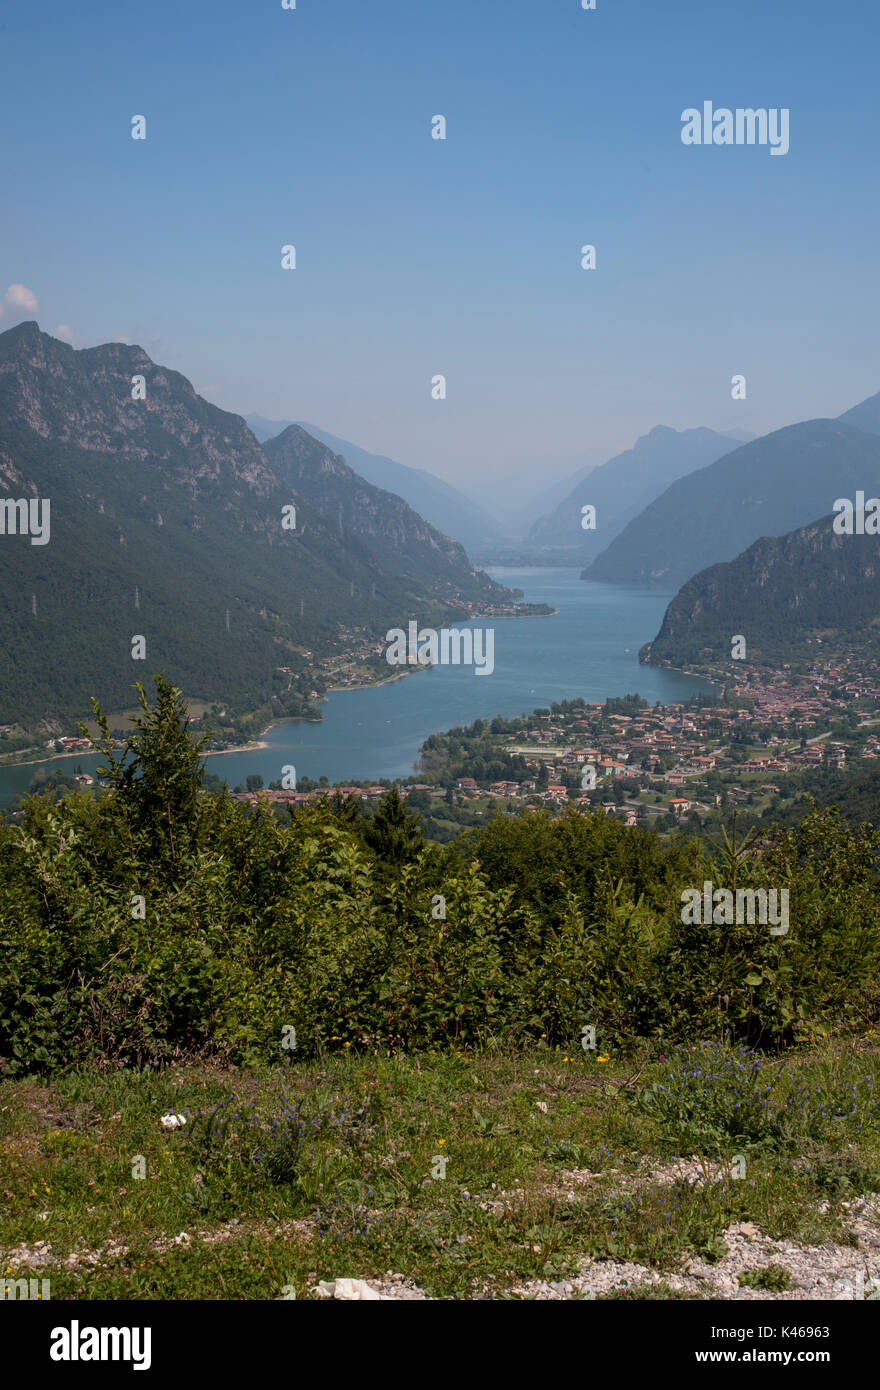 Lago Didro High Resolution Stock Photography and Images - Alamy